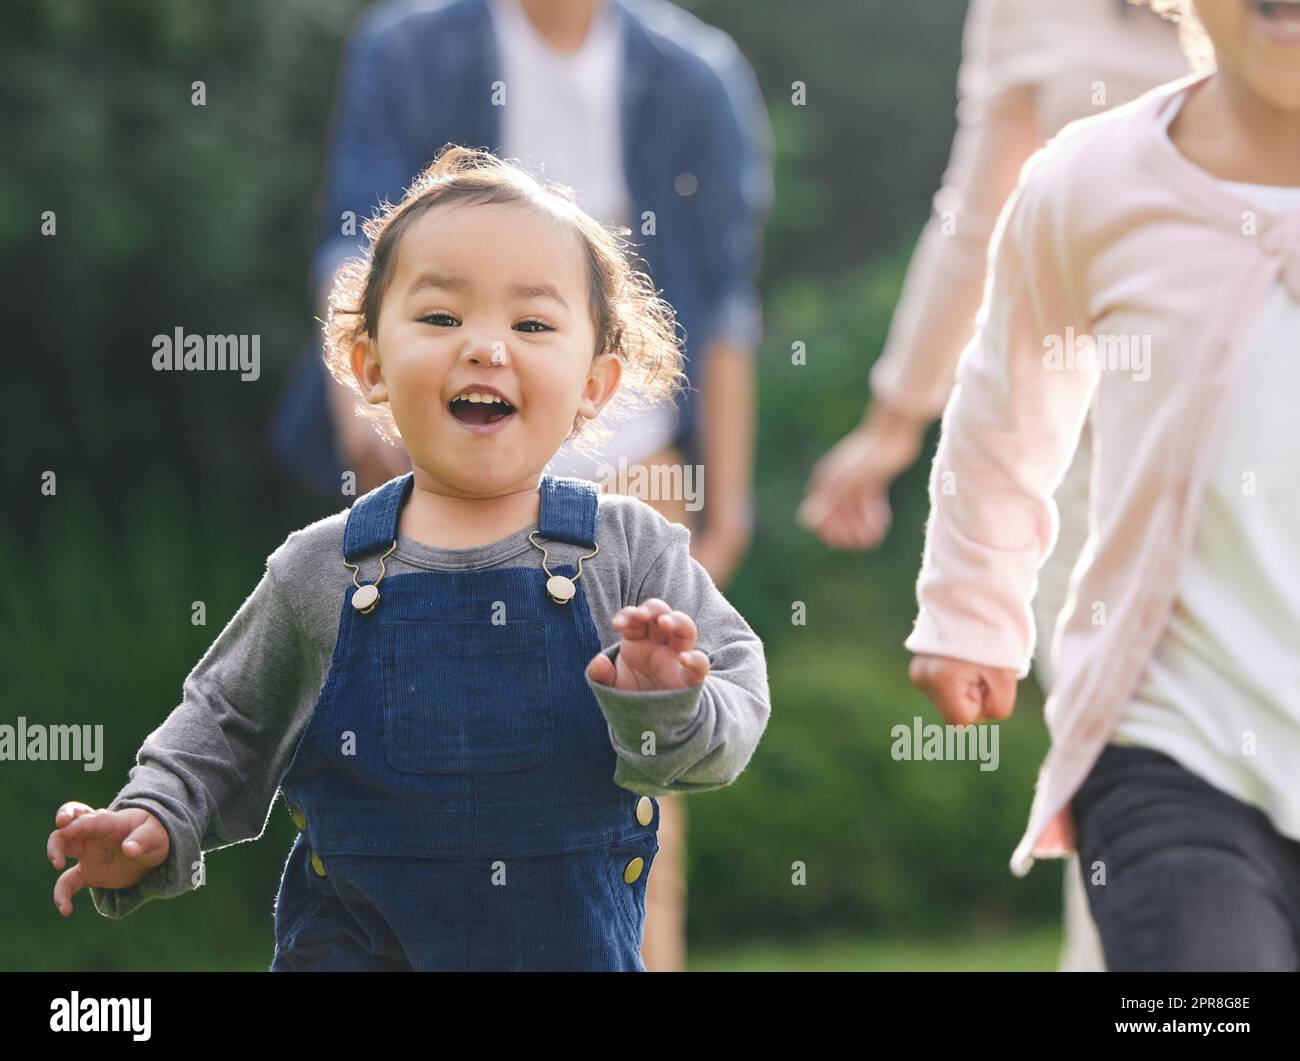 A good time to laugh is anytime you can. Portrait of an adorable little girl having fun with her family outdoors. Stock Photo